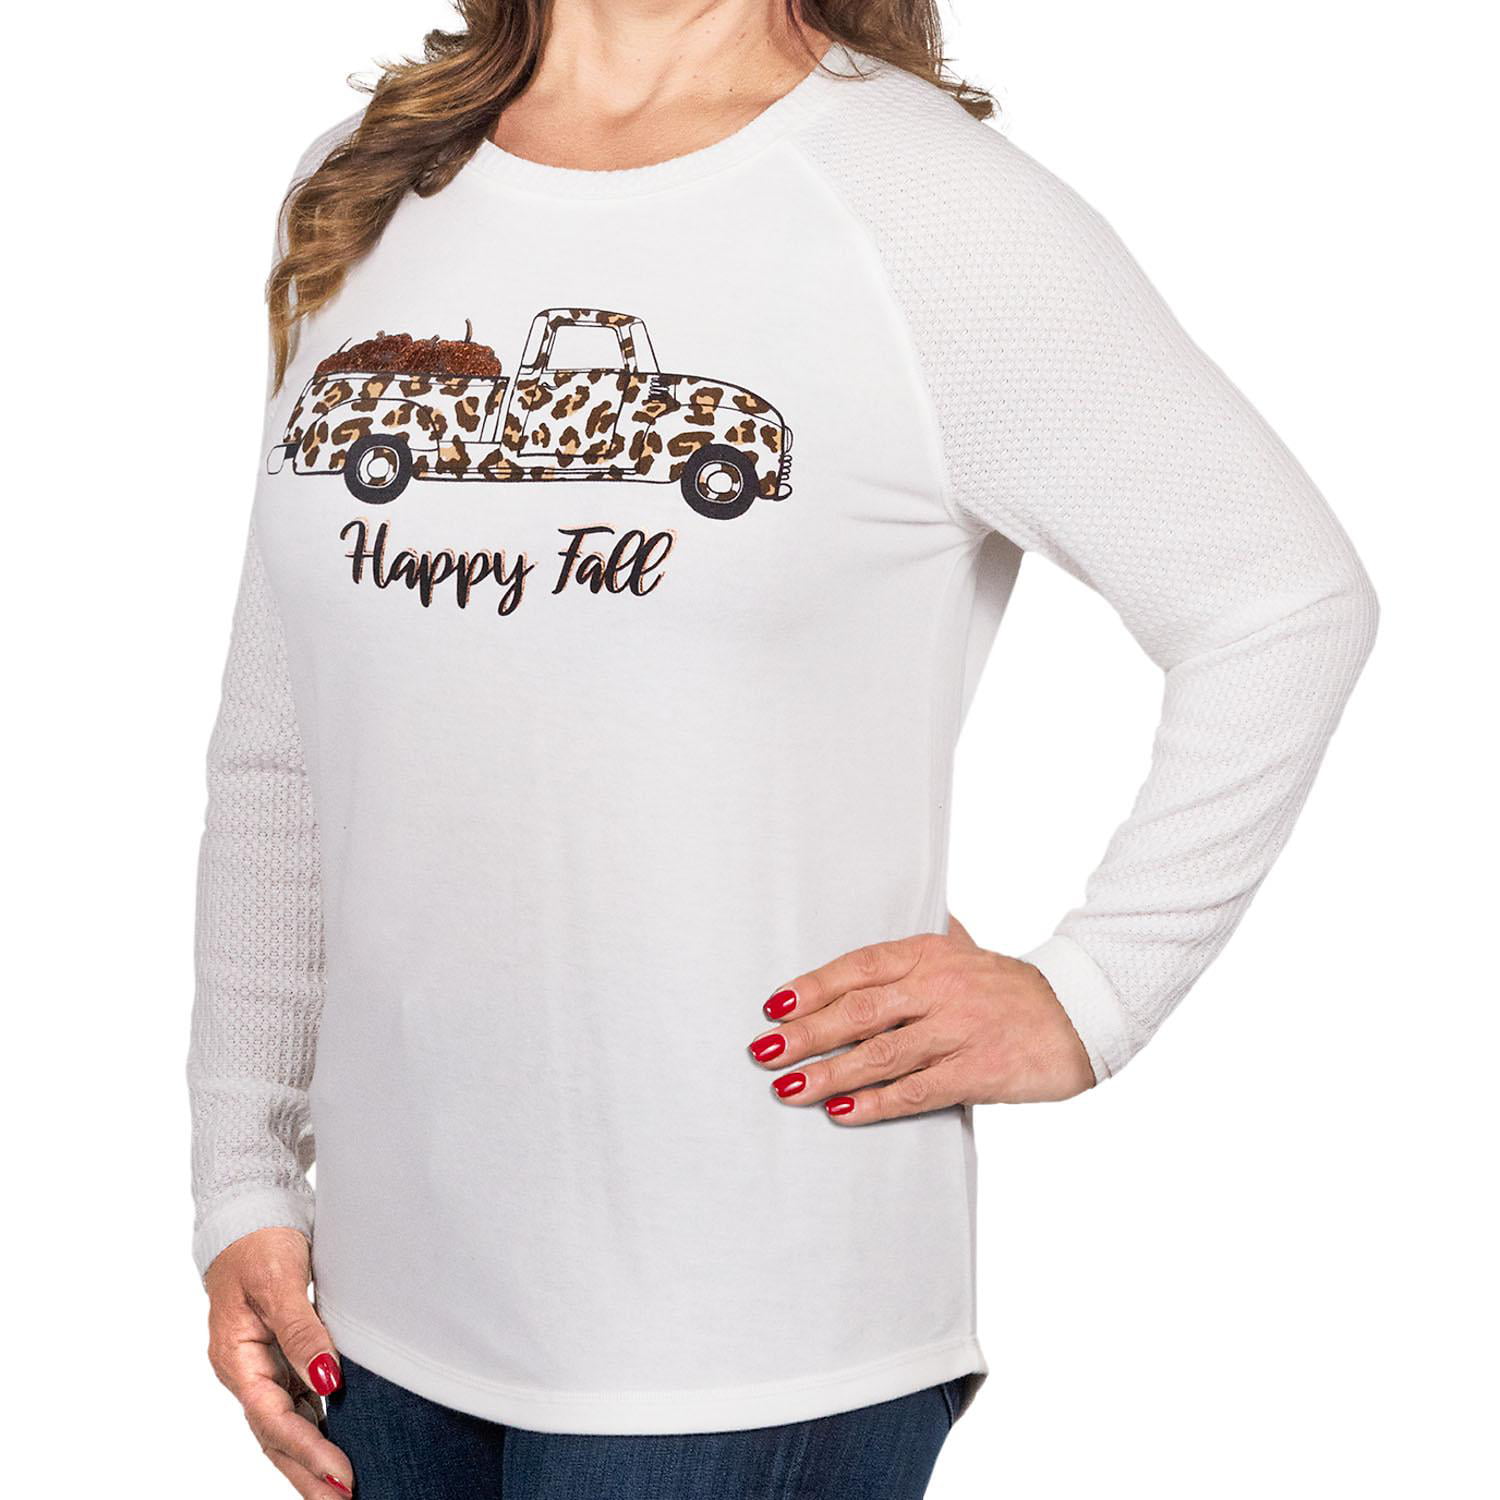 Modern Canvas Ladies Harvest Top in Happy Fall, Size XX-Large - Walmart.com